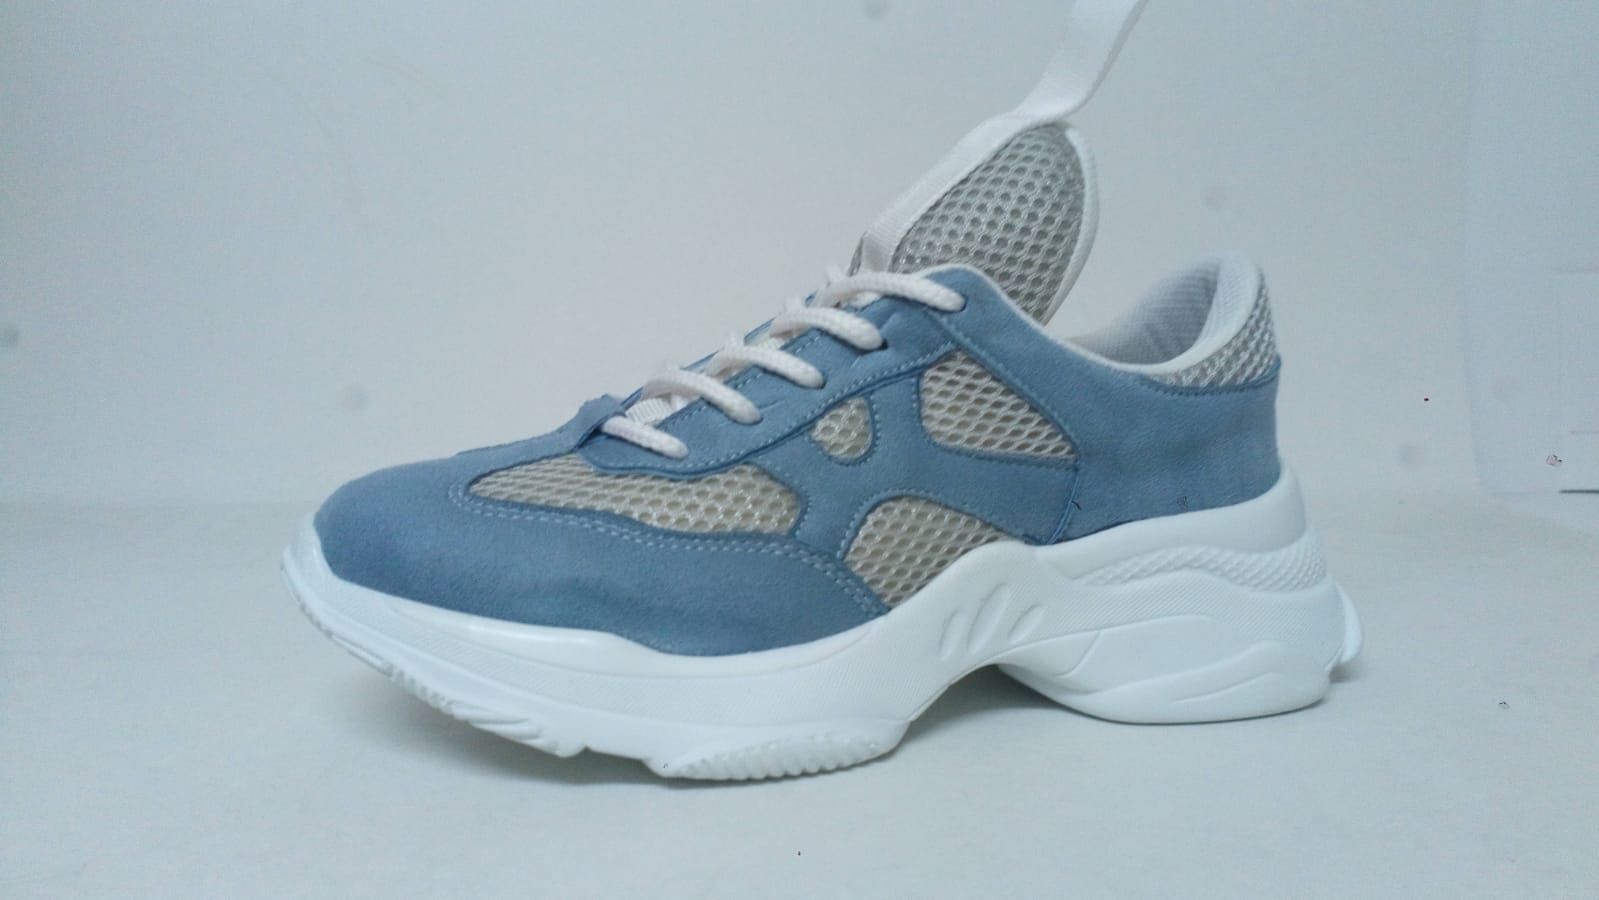 Hello! I will Buy wholesale sports footwear. At least 1000 pairs